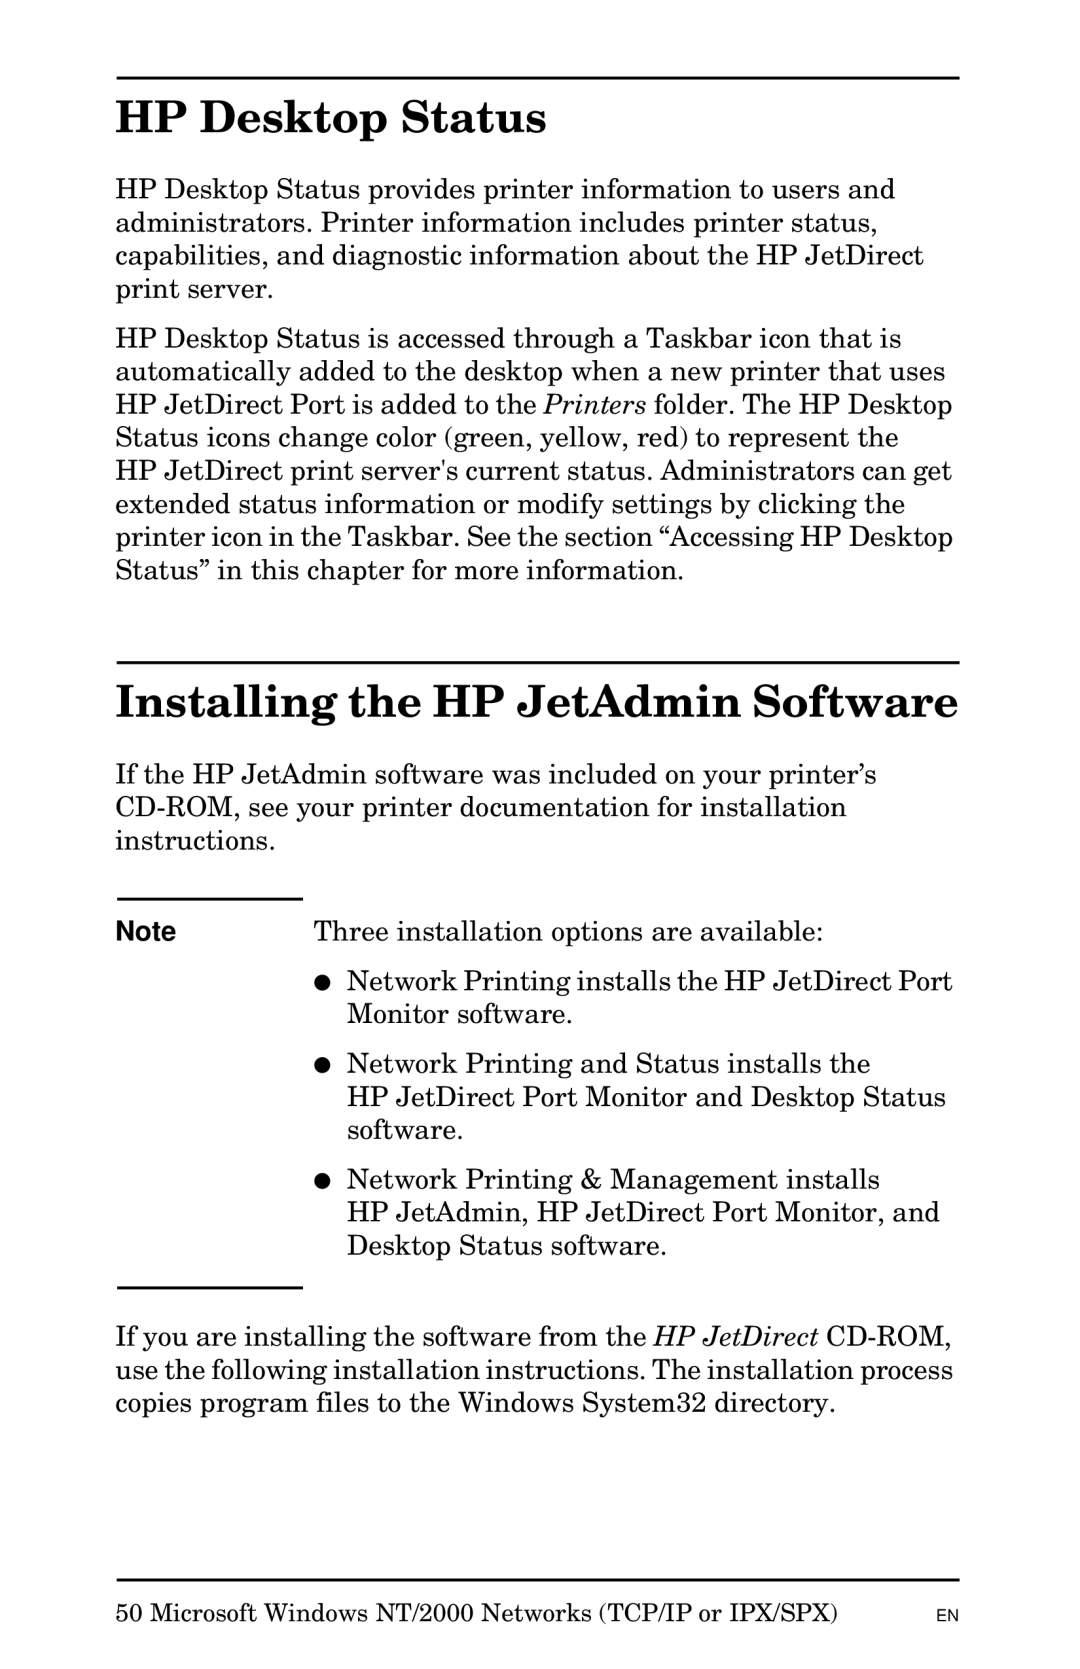 HP Jetadmin Software for OS/2 manual Microsoft Windows NT/2000 Networks TCP/IP or IPX/SPX 